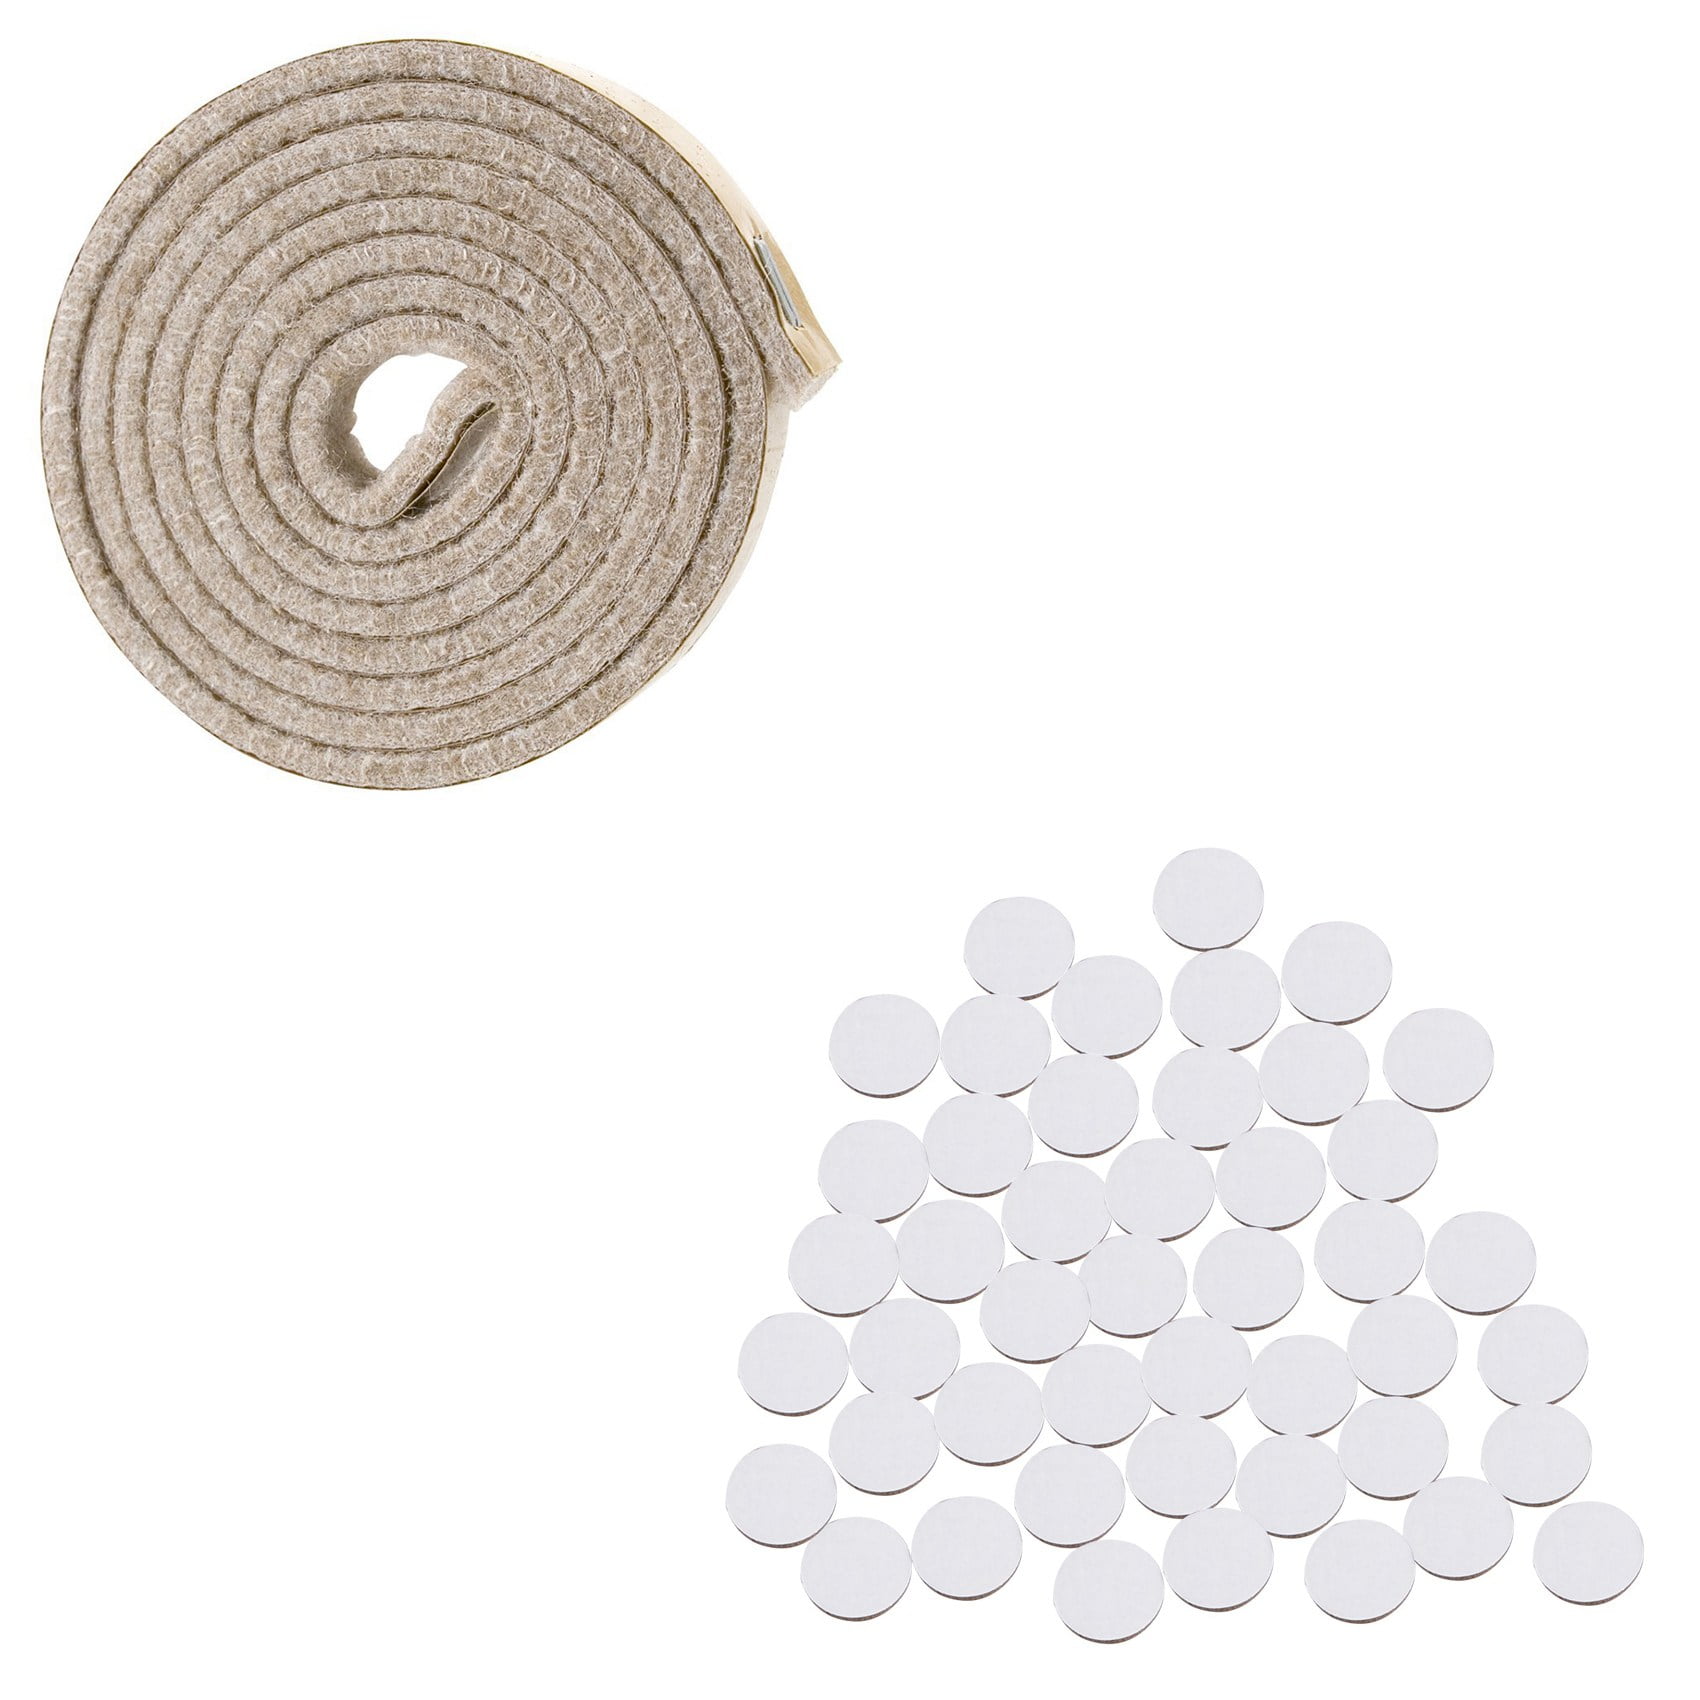 48PCS Round Felt Furniture Pads for Hard Surfaces Floor Protectors FD8 